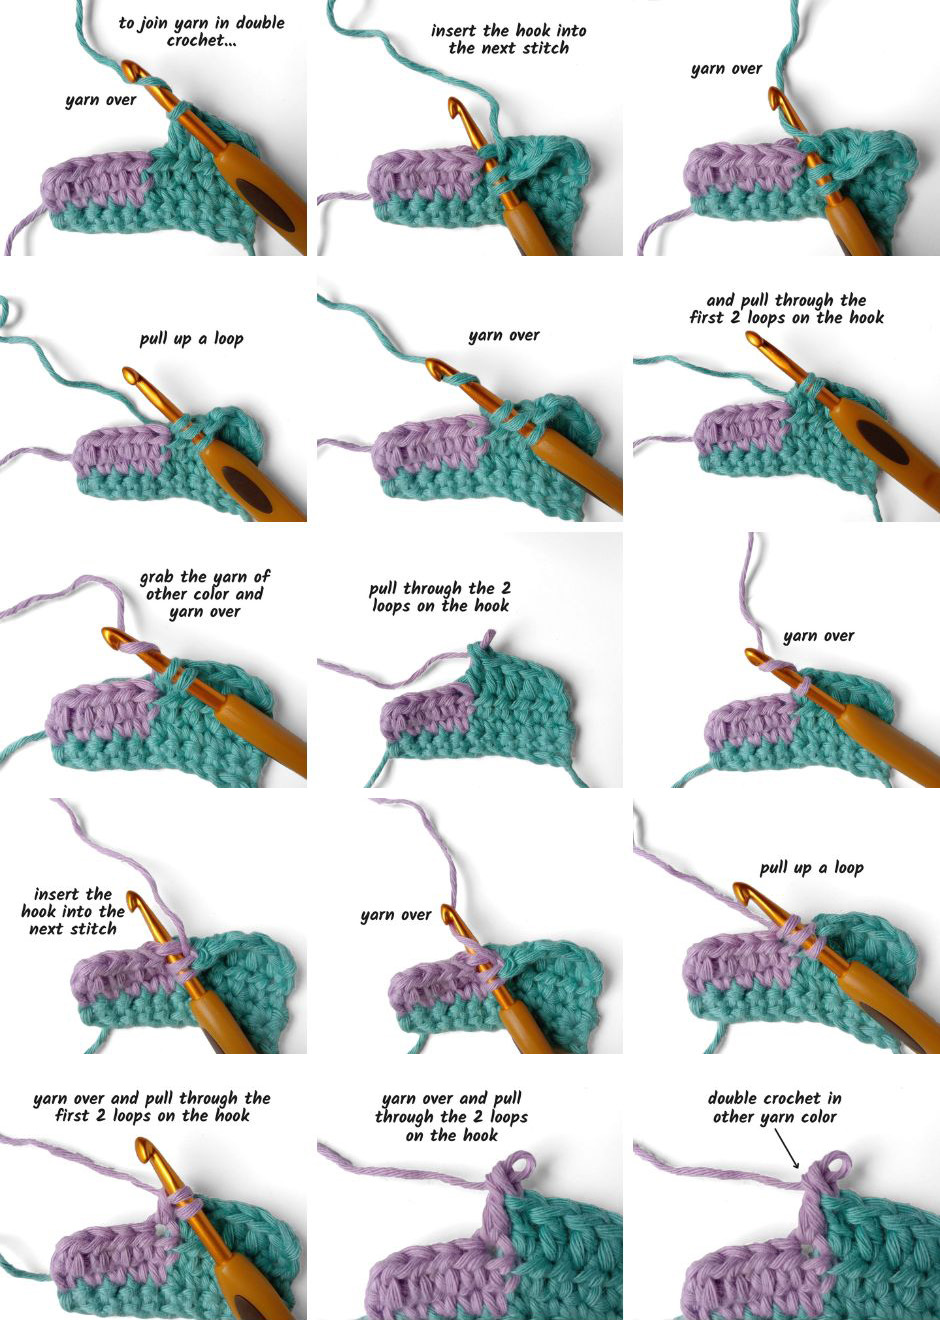 steps to join a different color yarn in double crochet